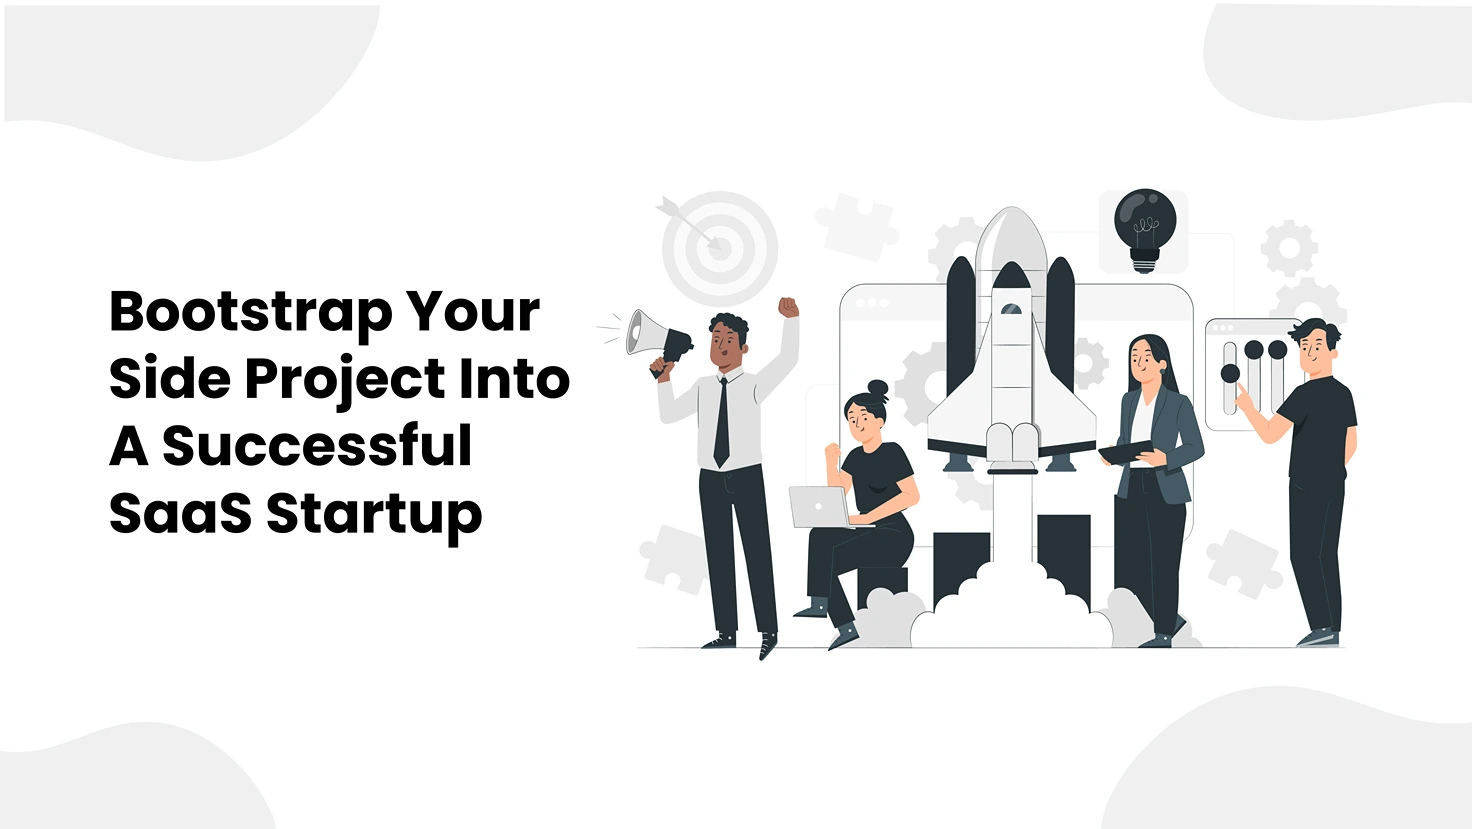 Bootstrap Your Side Project Into A Successful Saas Startup